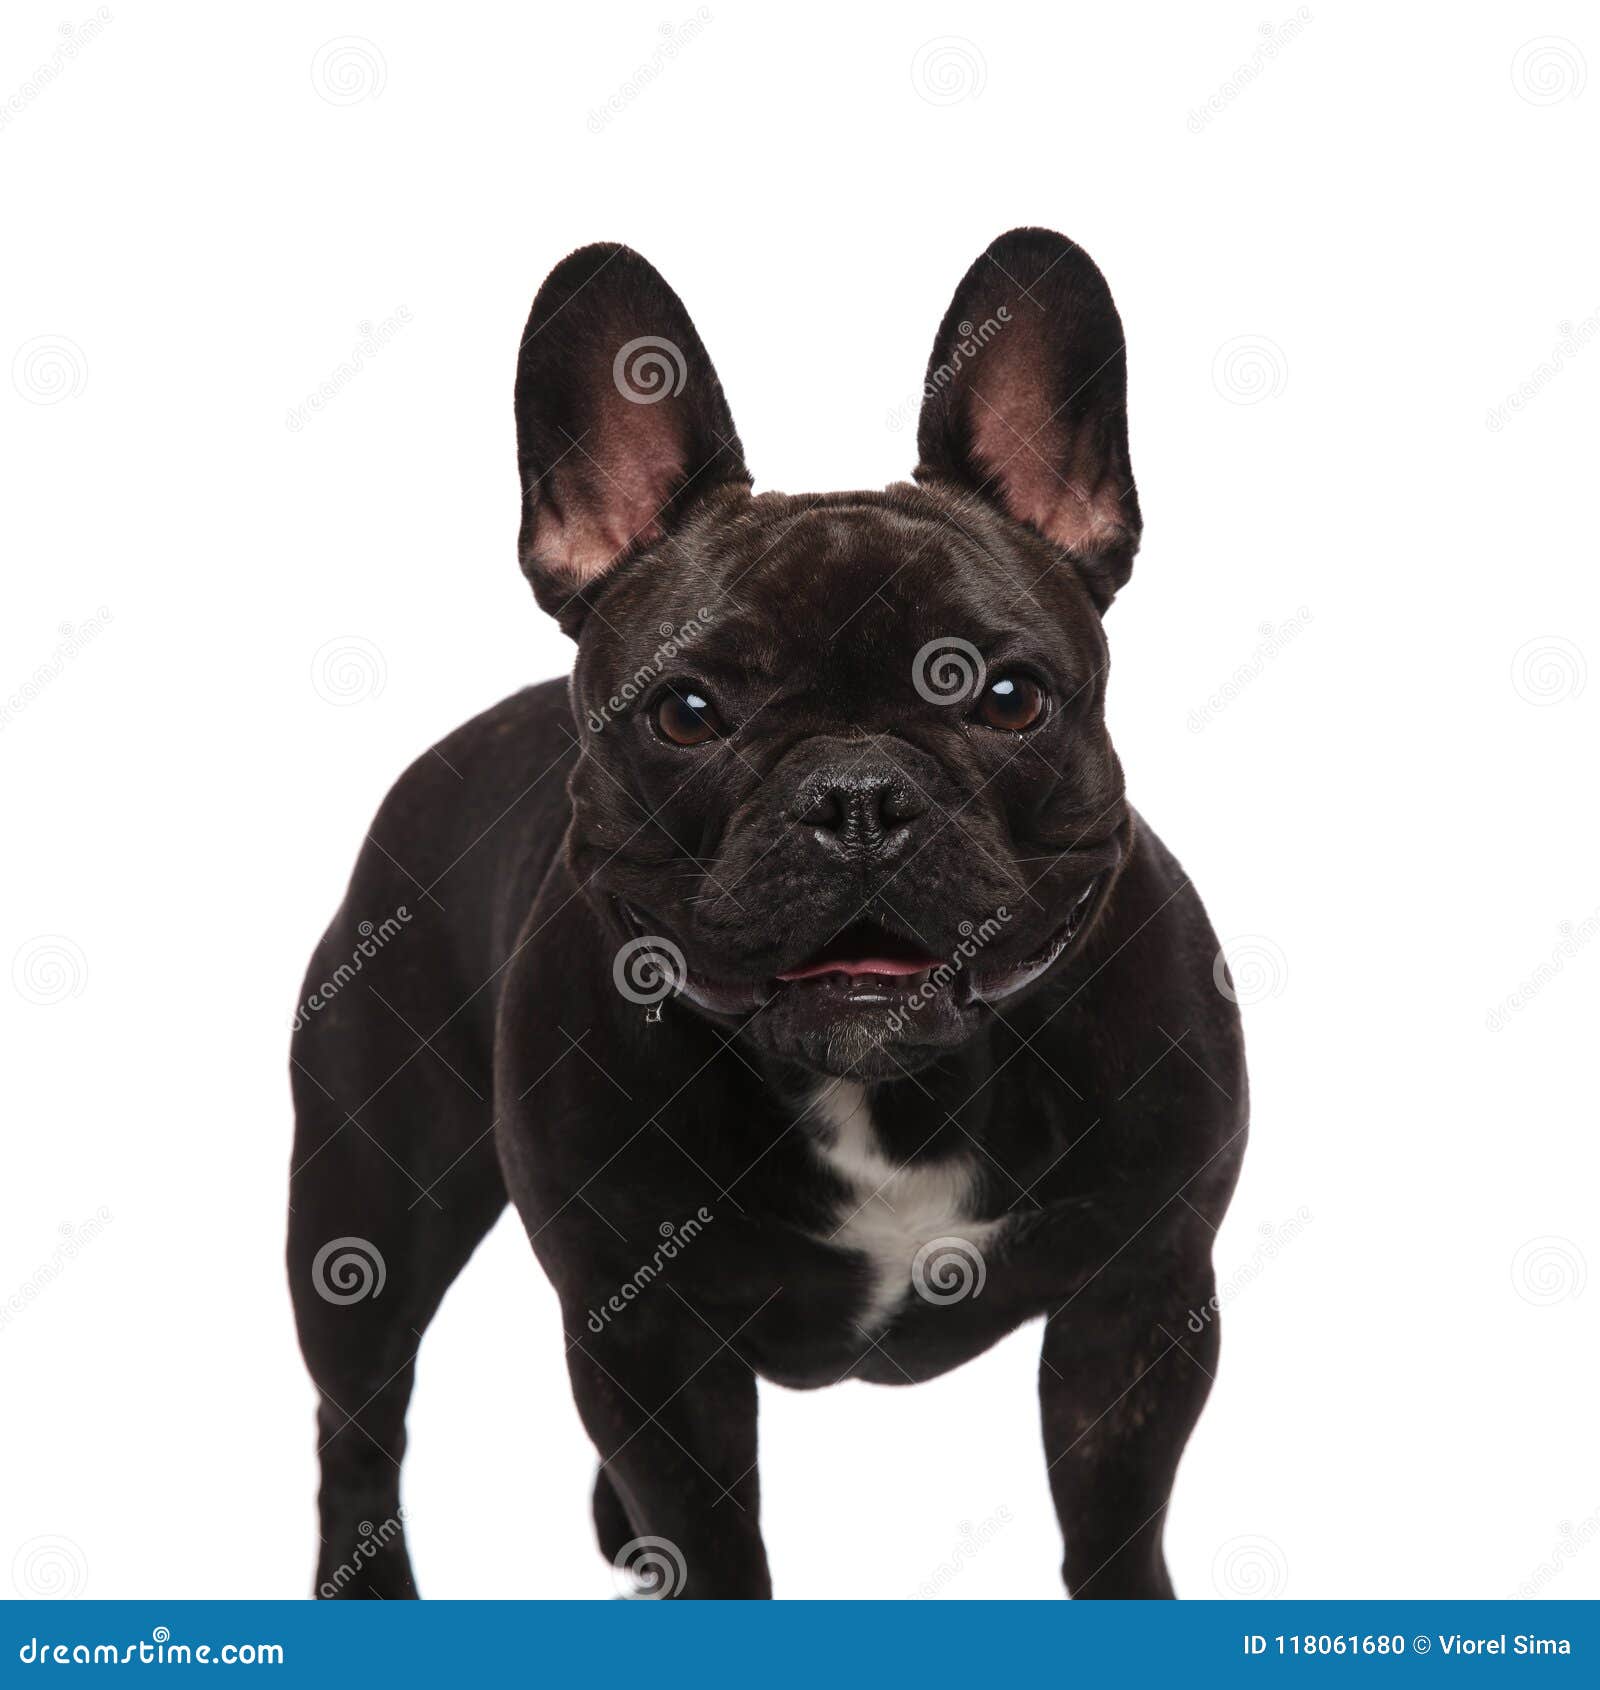 Cute Black French Bulldog Standing and Panting Stock Photo - Image of ...